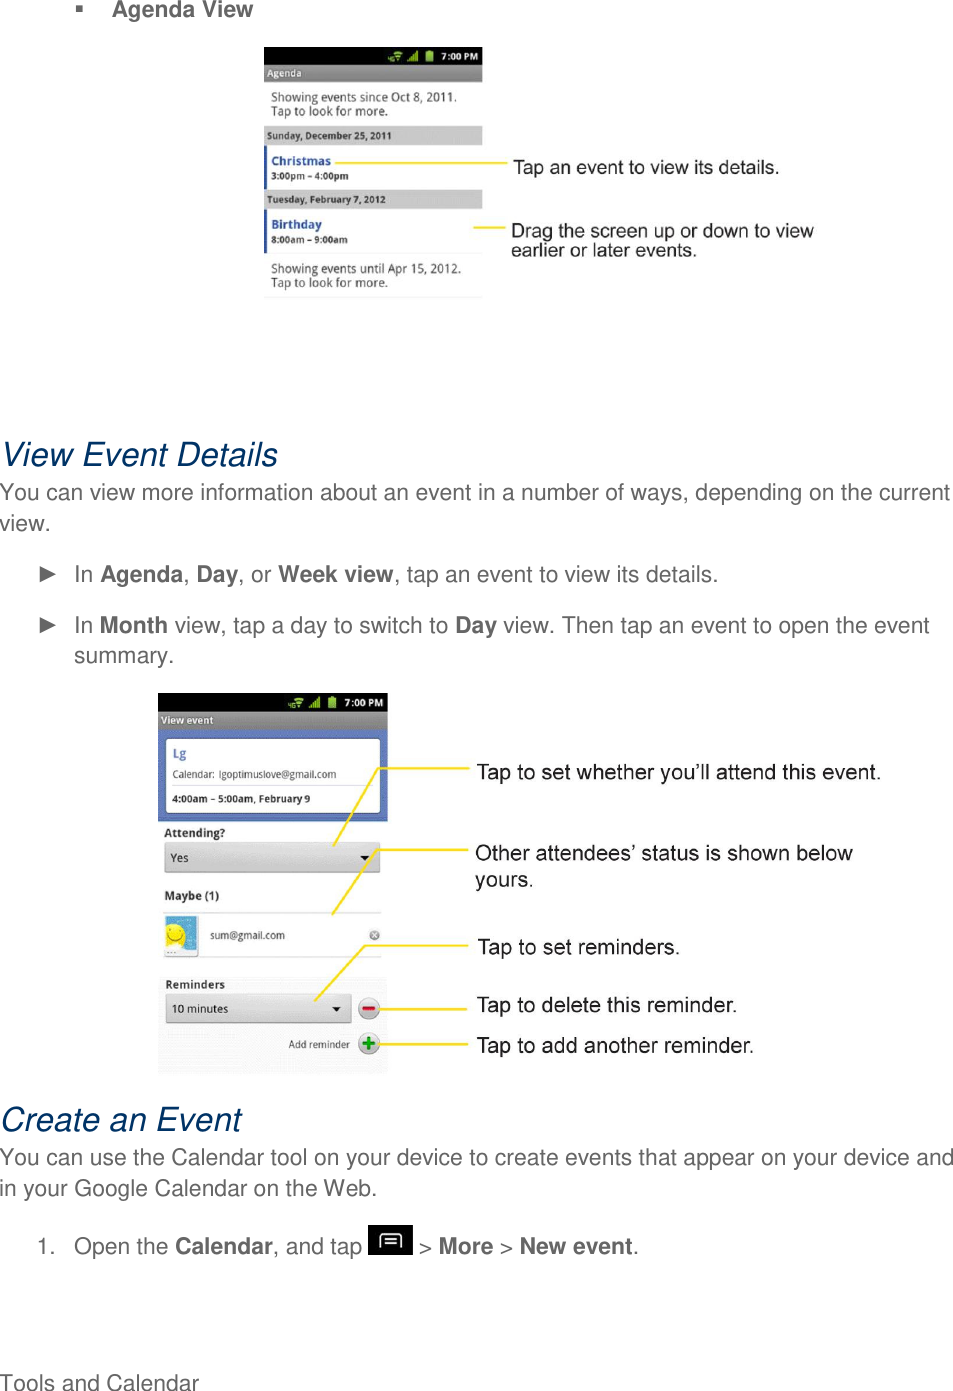  Tools and Calendar      Agenda View  View Event Details You can view more information about an event in a number of ways, depending on the current view.   In Agenda, Day, or Week view, tap an event to view its details.   In Month view, tap a day to switch to Day view. Then tap an event to open the event summary.  Create an Event You can use the Calendar tool on your device to create events that appear on your device and in your Google Calendar on the Web. 1.  Open the Calendar, and tap   &gt; More &gt; New event. 